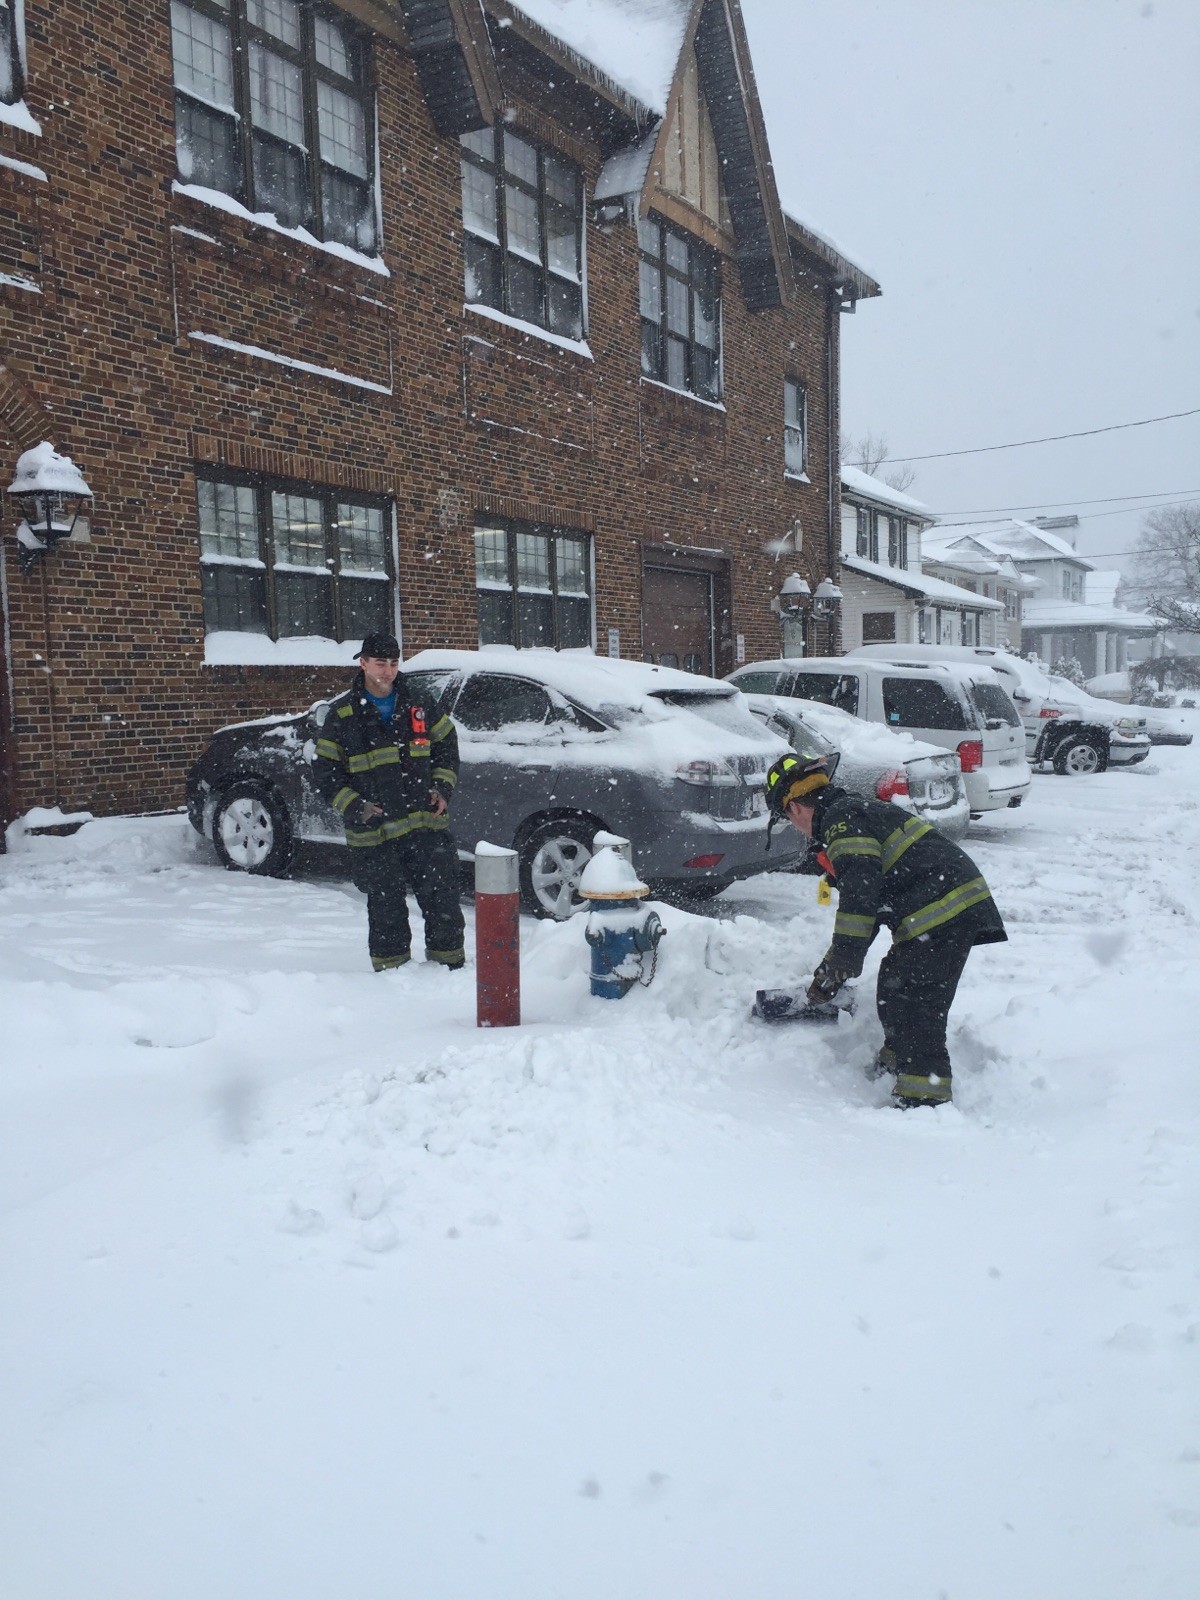 Firefighters cleared fire hydrants across the village in the event of an emergency.